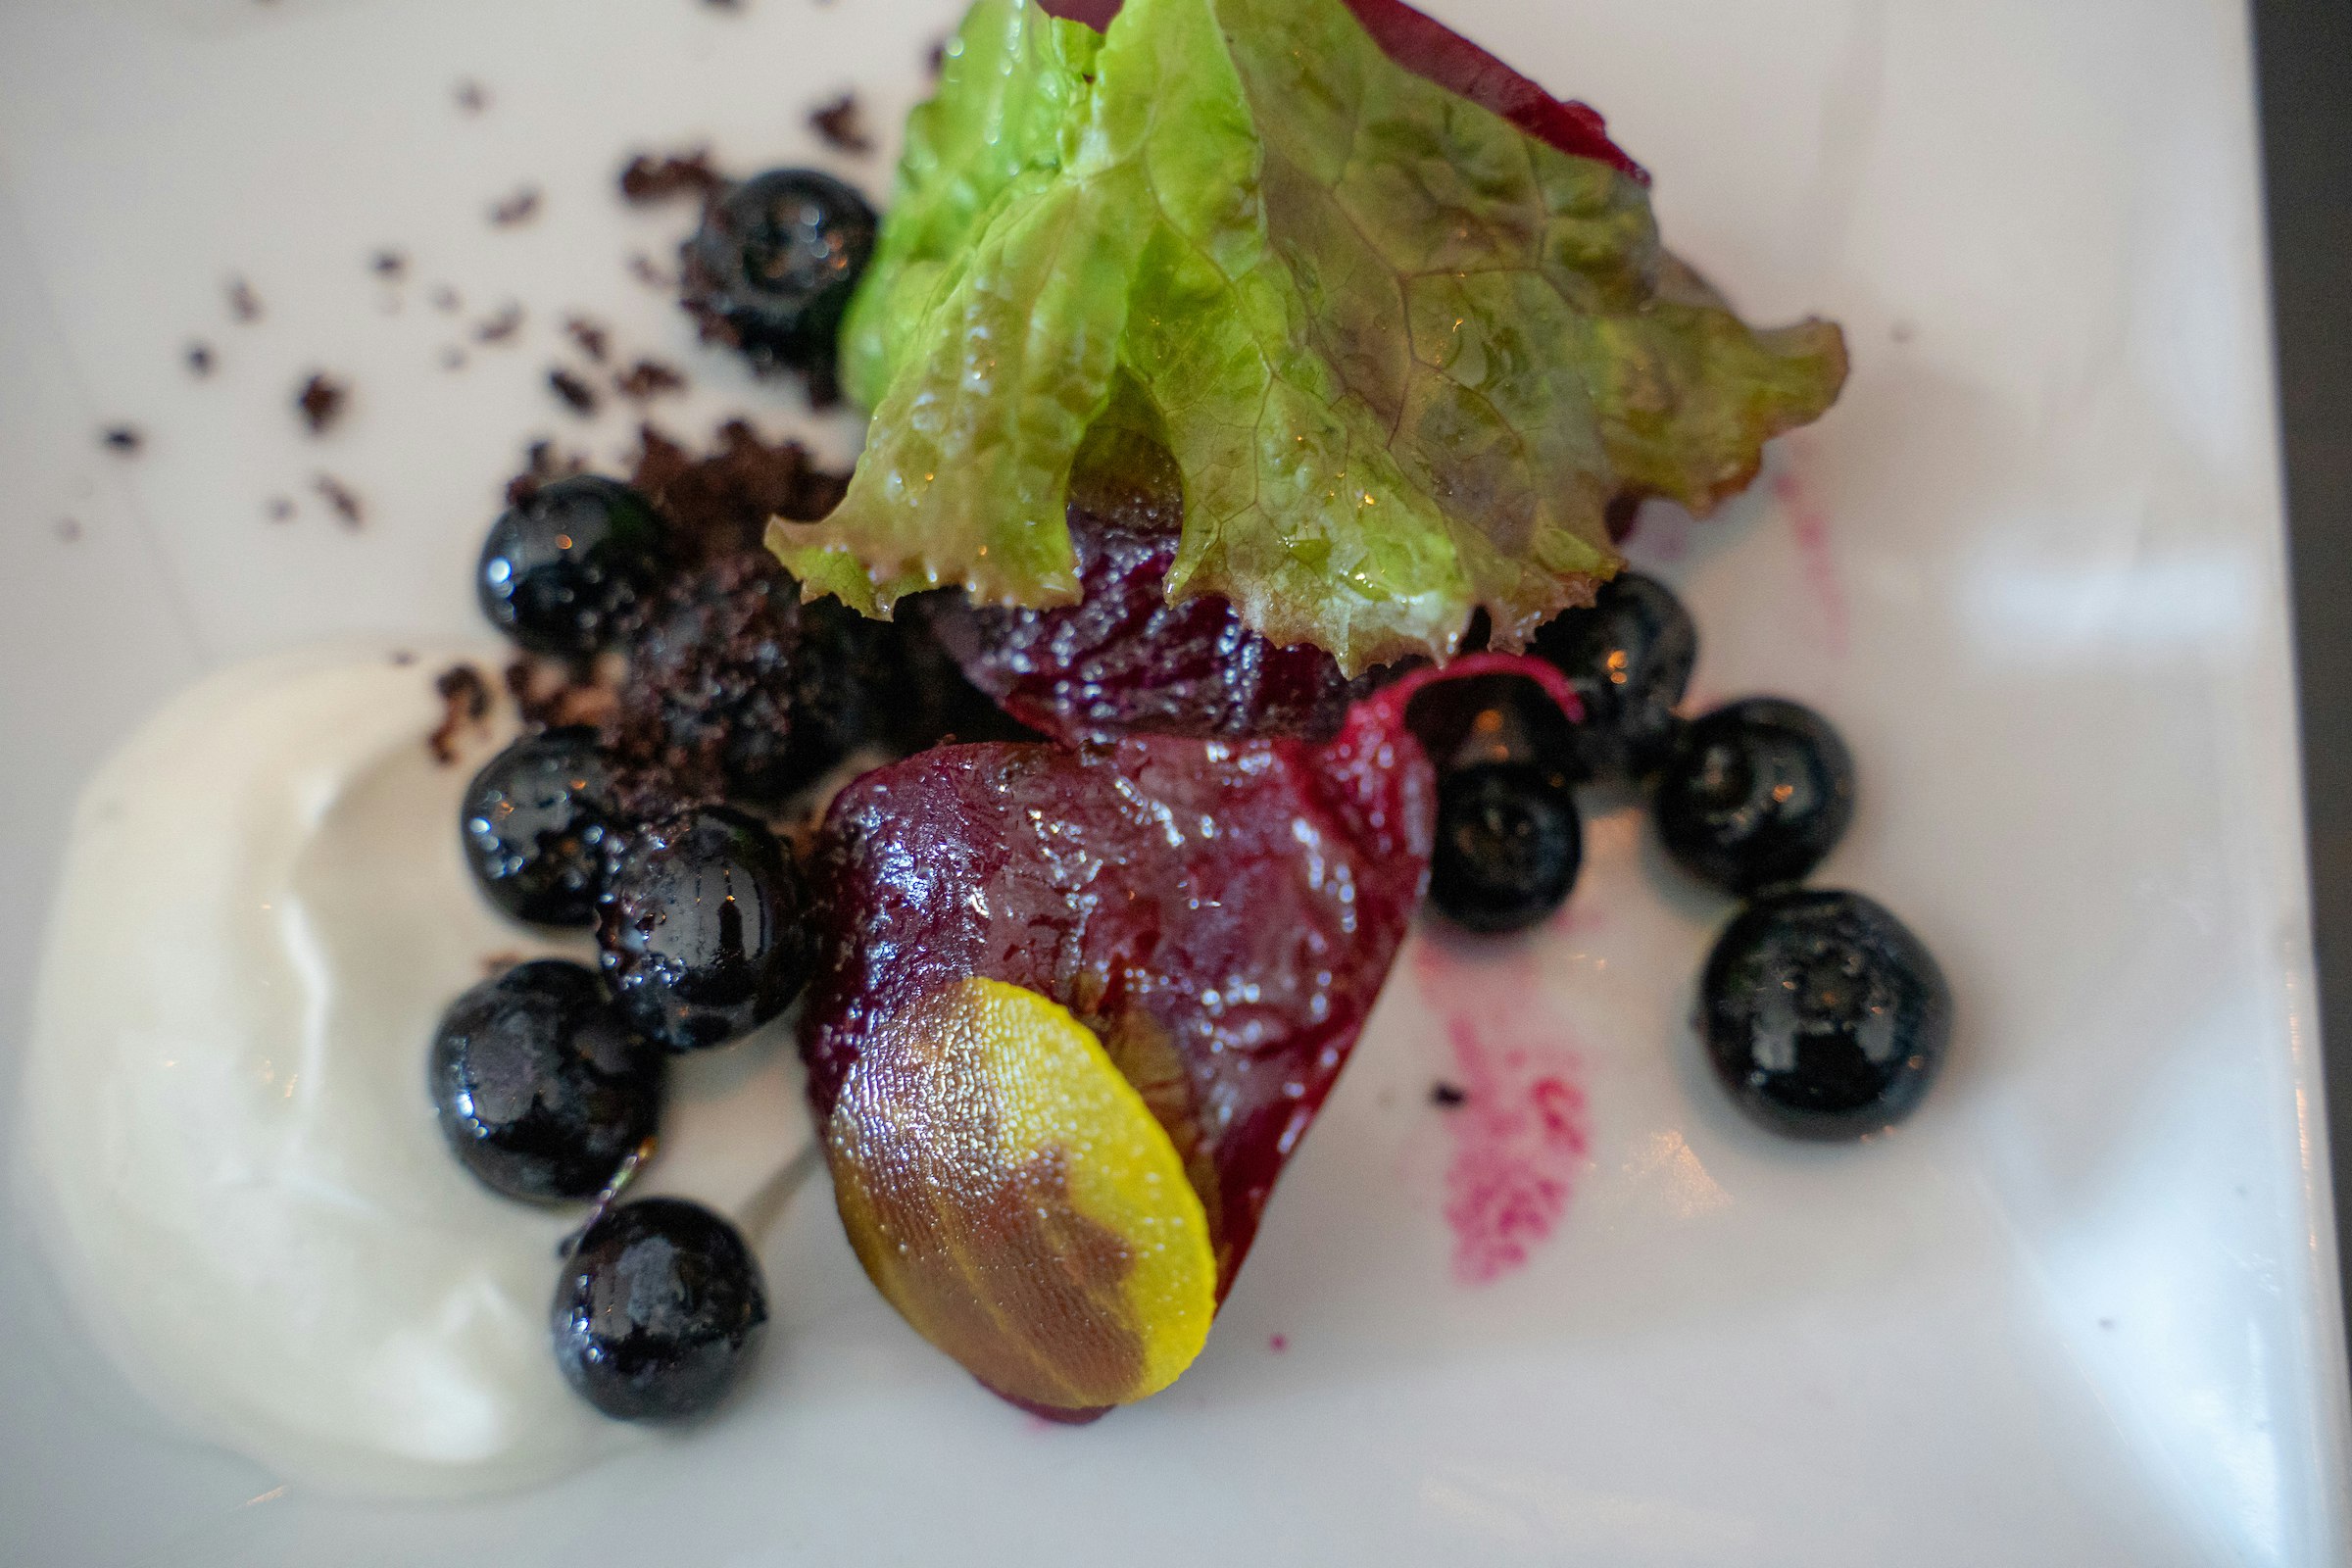 A brightly hued close-up shot of a blueberry and beet salad at Evo Kitchen + Bar in Portlane, Maine